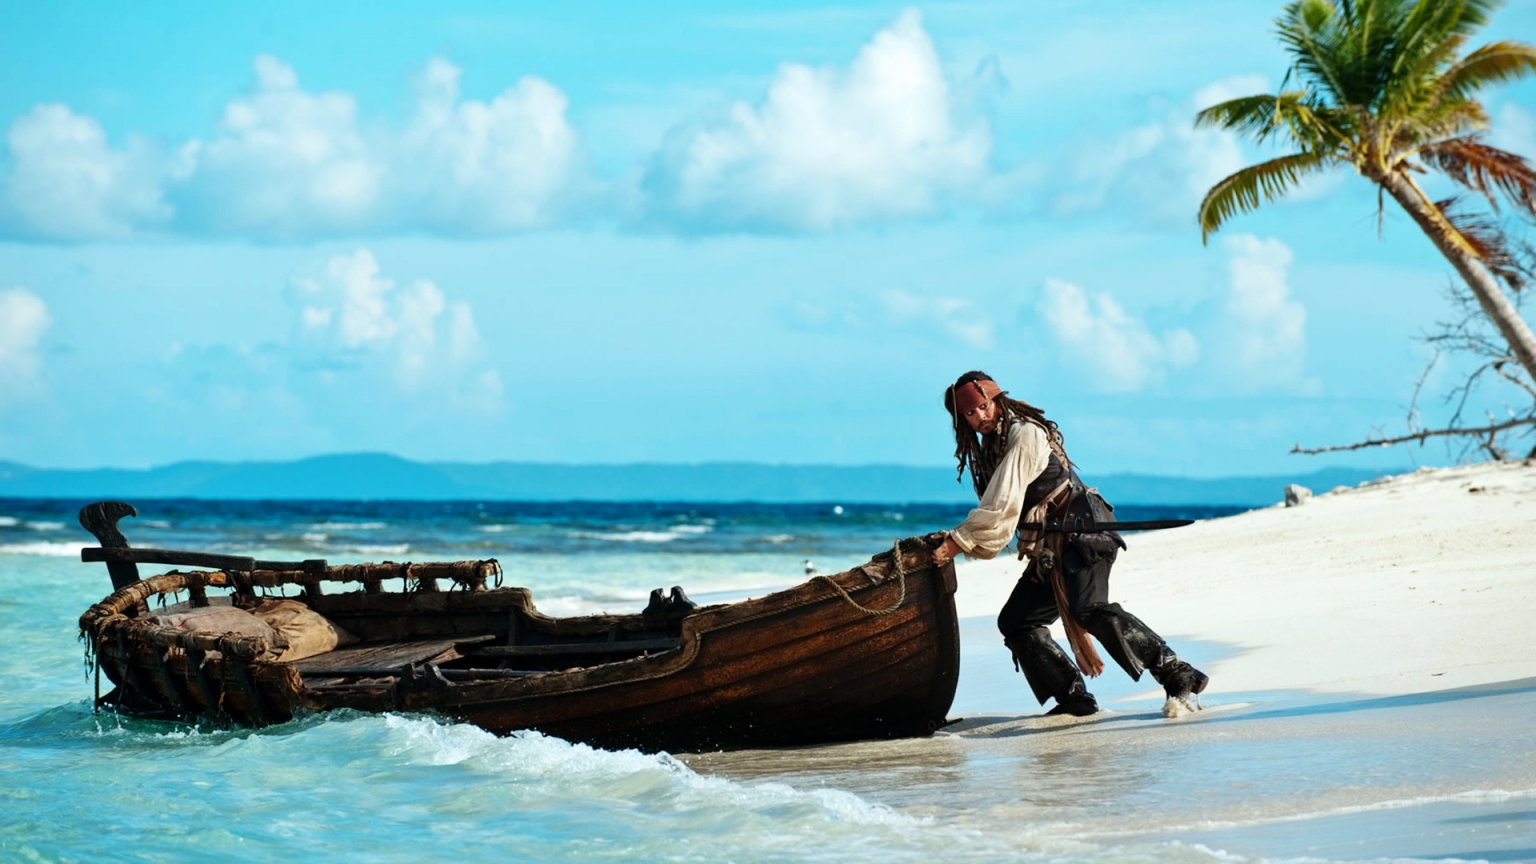 Jack Sparrow Pirates of the Caribbean 4 for 1536 x 864 HDTV resolution